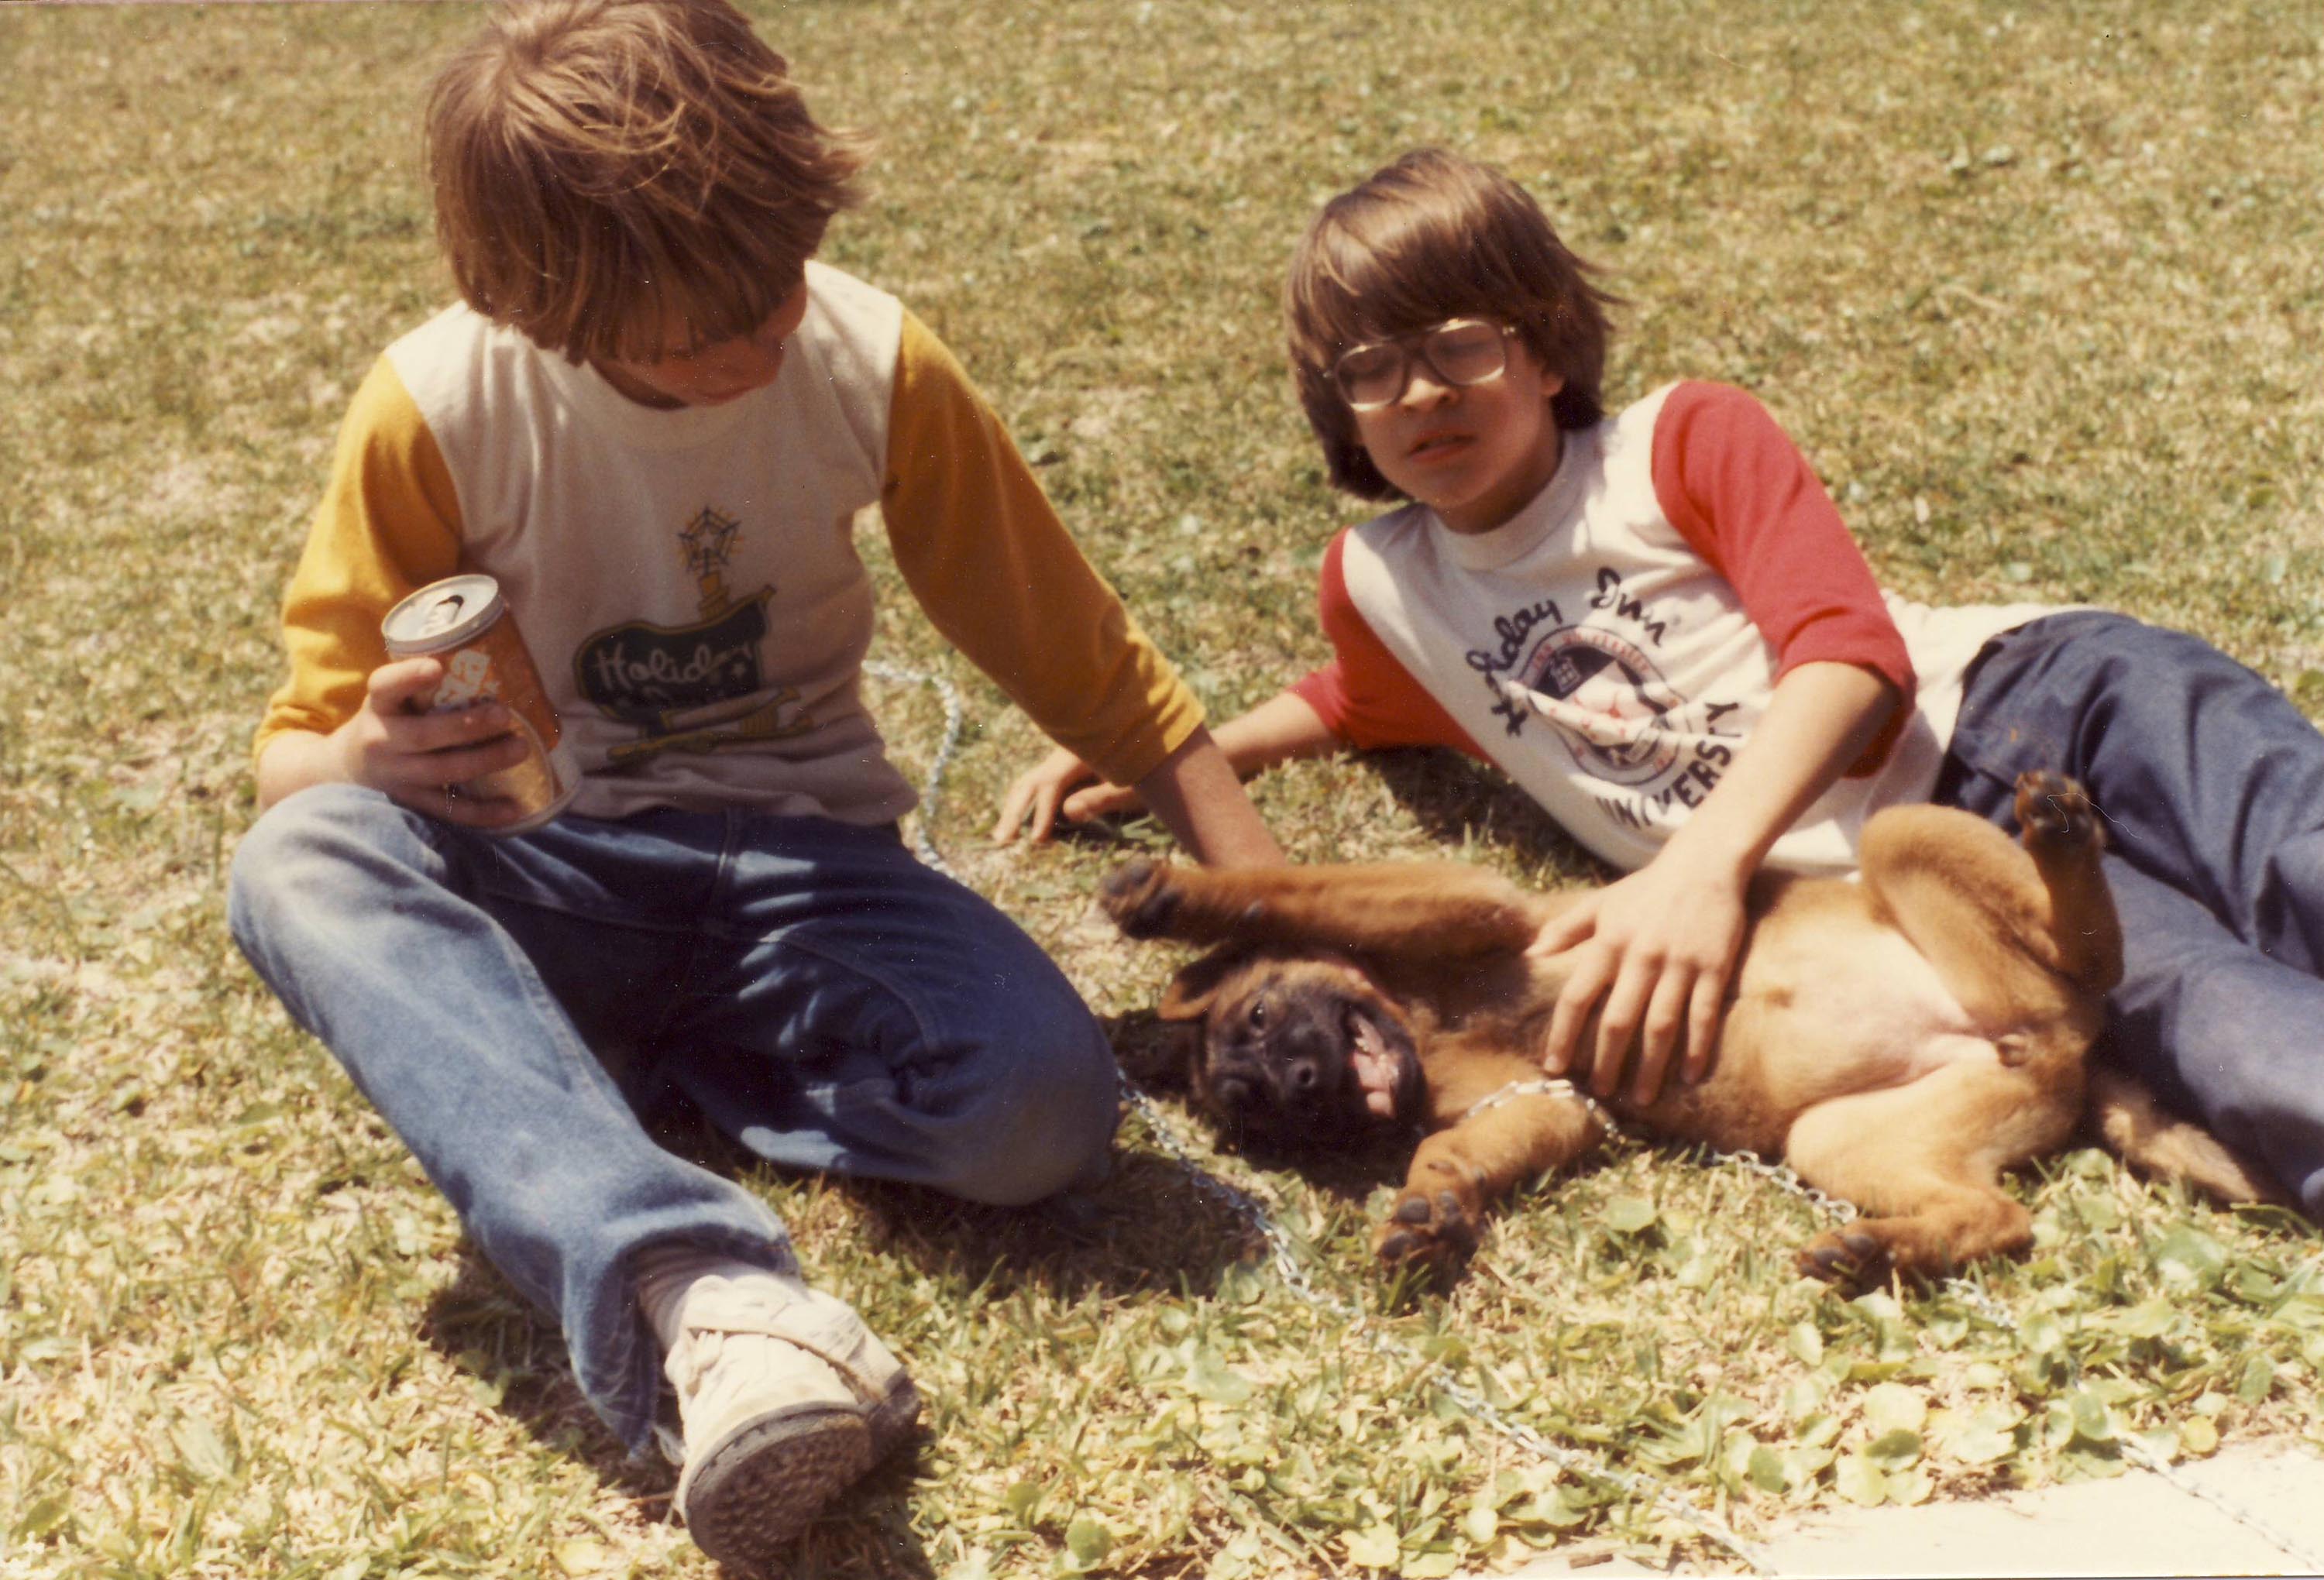 My photo from 1983 from an employee picnic in Houston. These are my two sons enjoying the day with their new pup Chu-e.